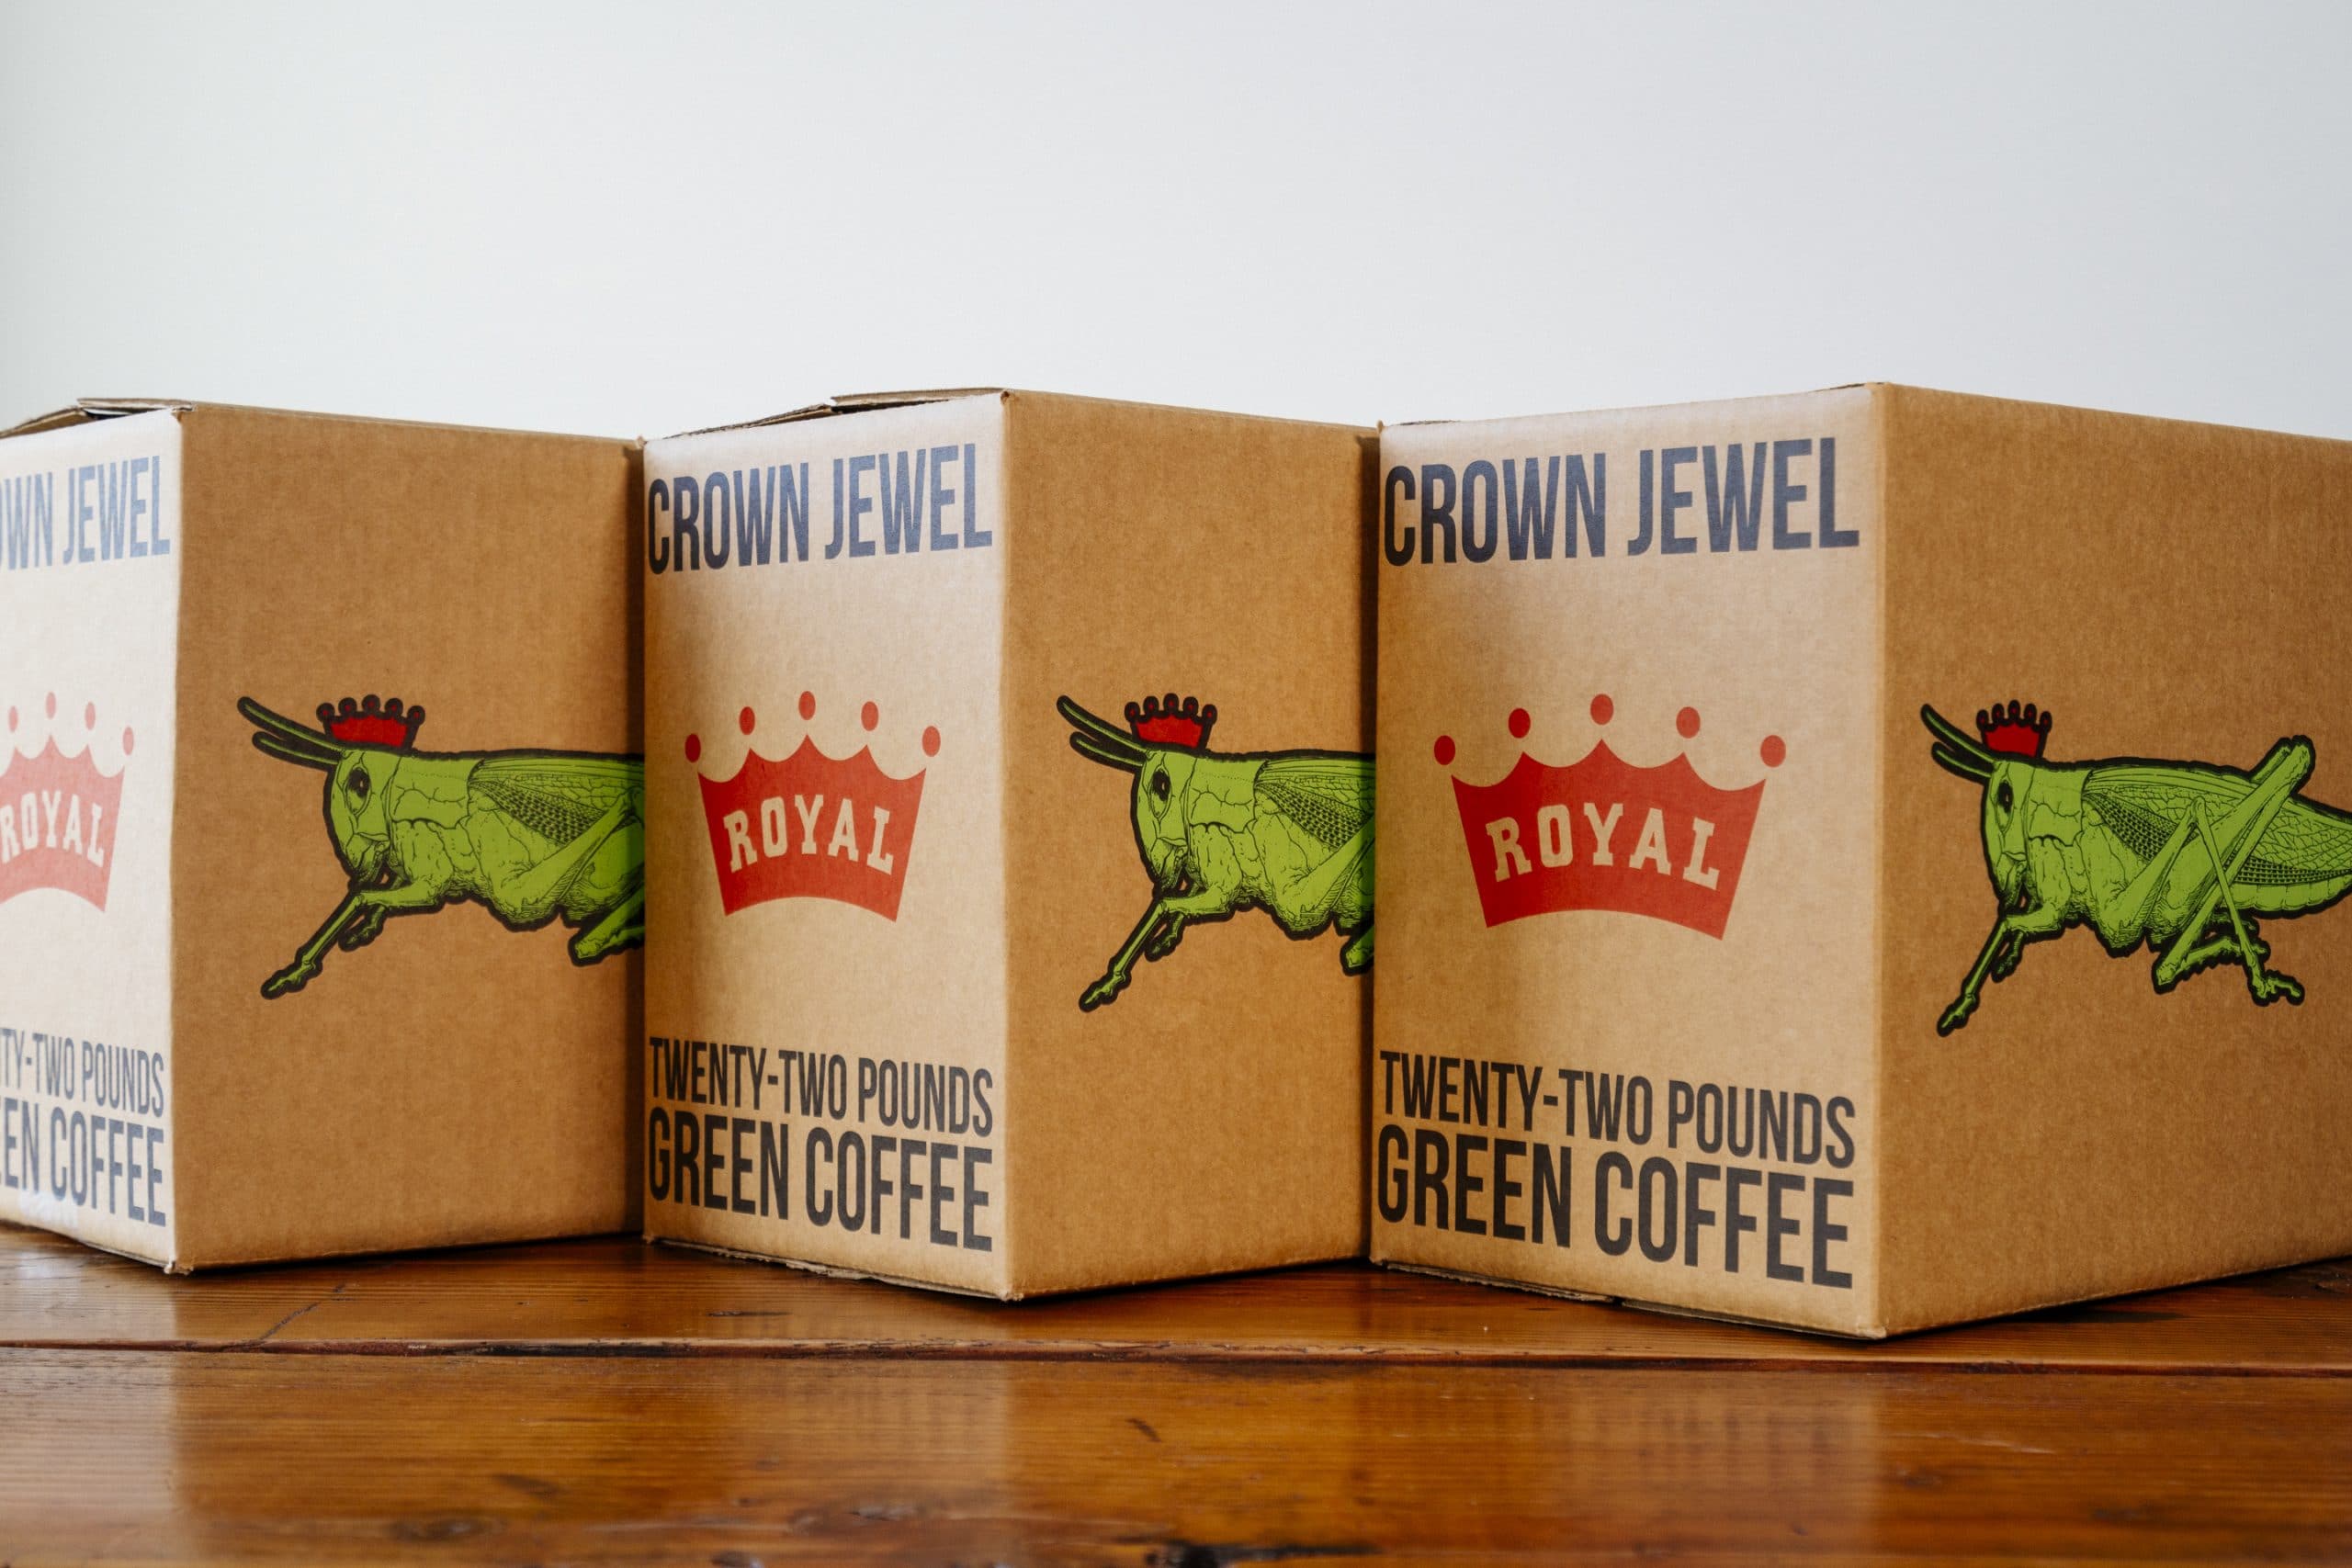 A trio of Royal Coffee Crown Jewel boxes showcasing the refreshed identity